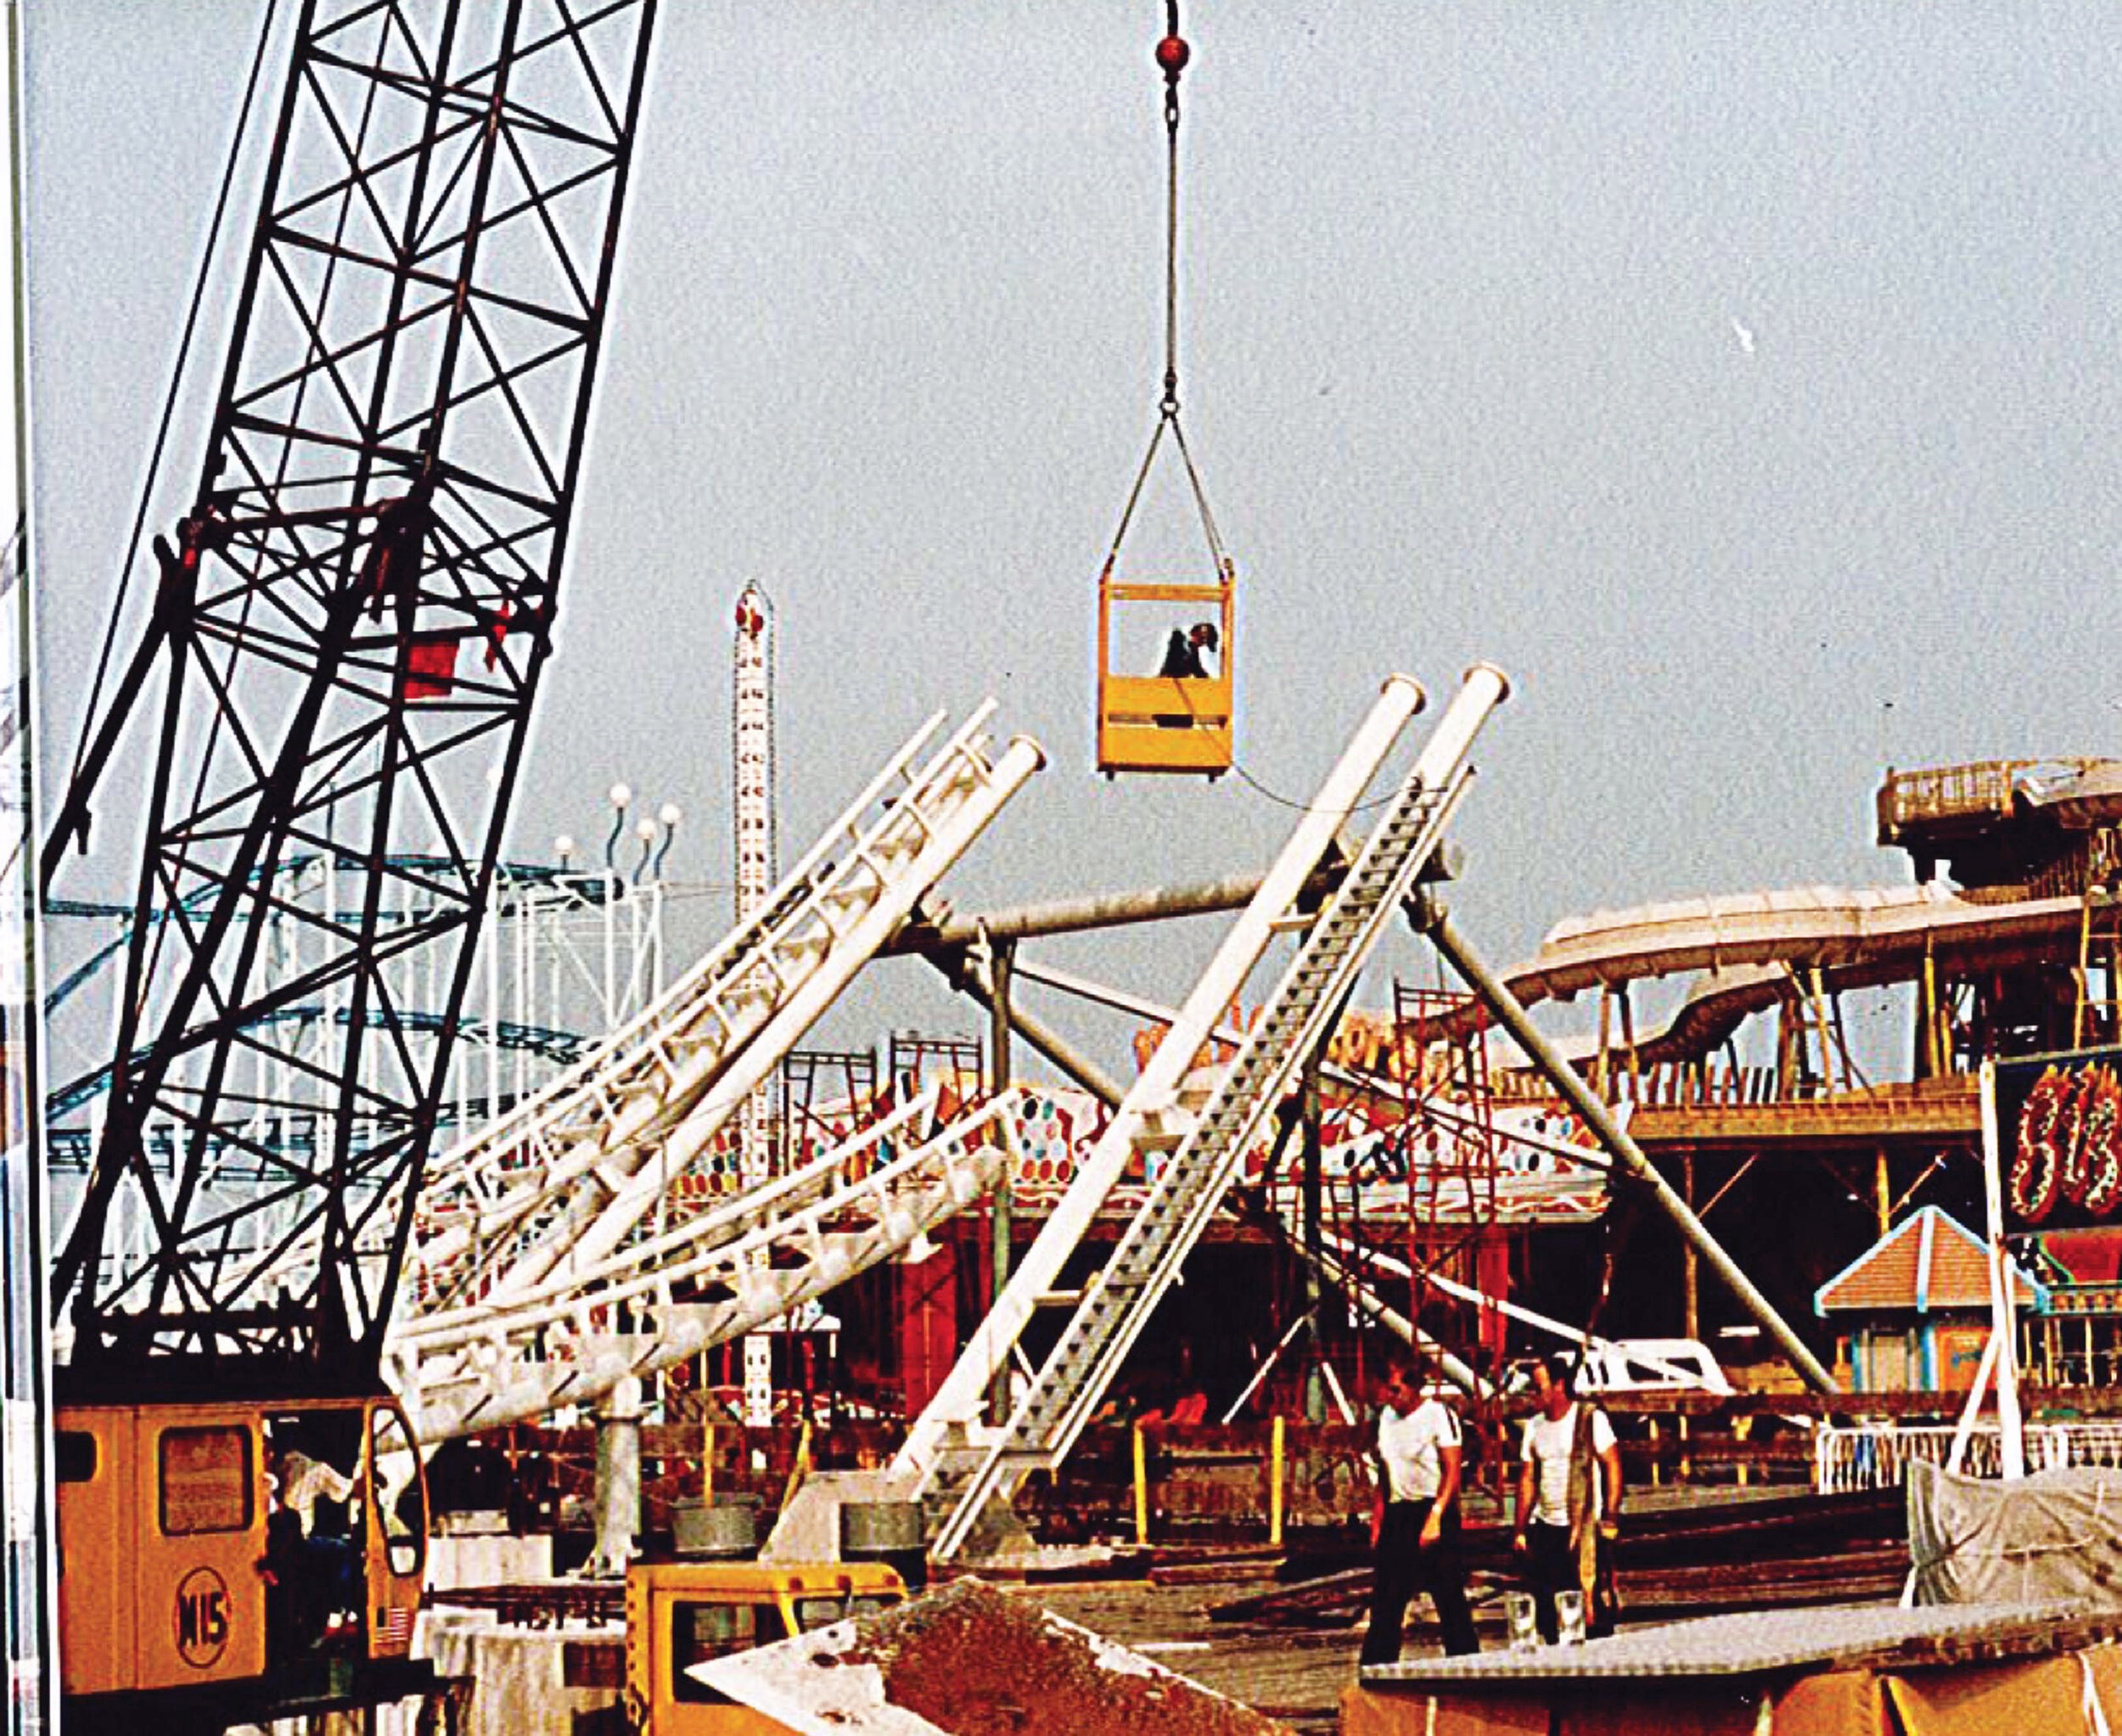 The Sea Serpent Roller Coaster being built on Mariner’s Pier. It opened in 1984.